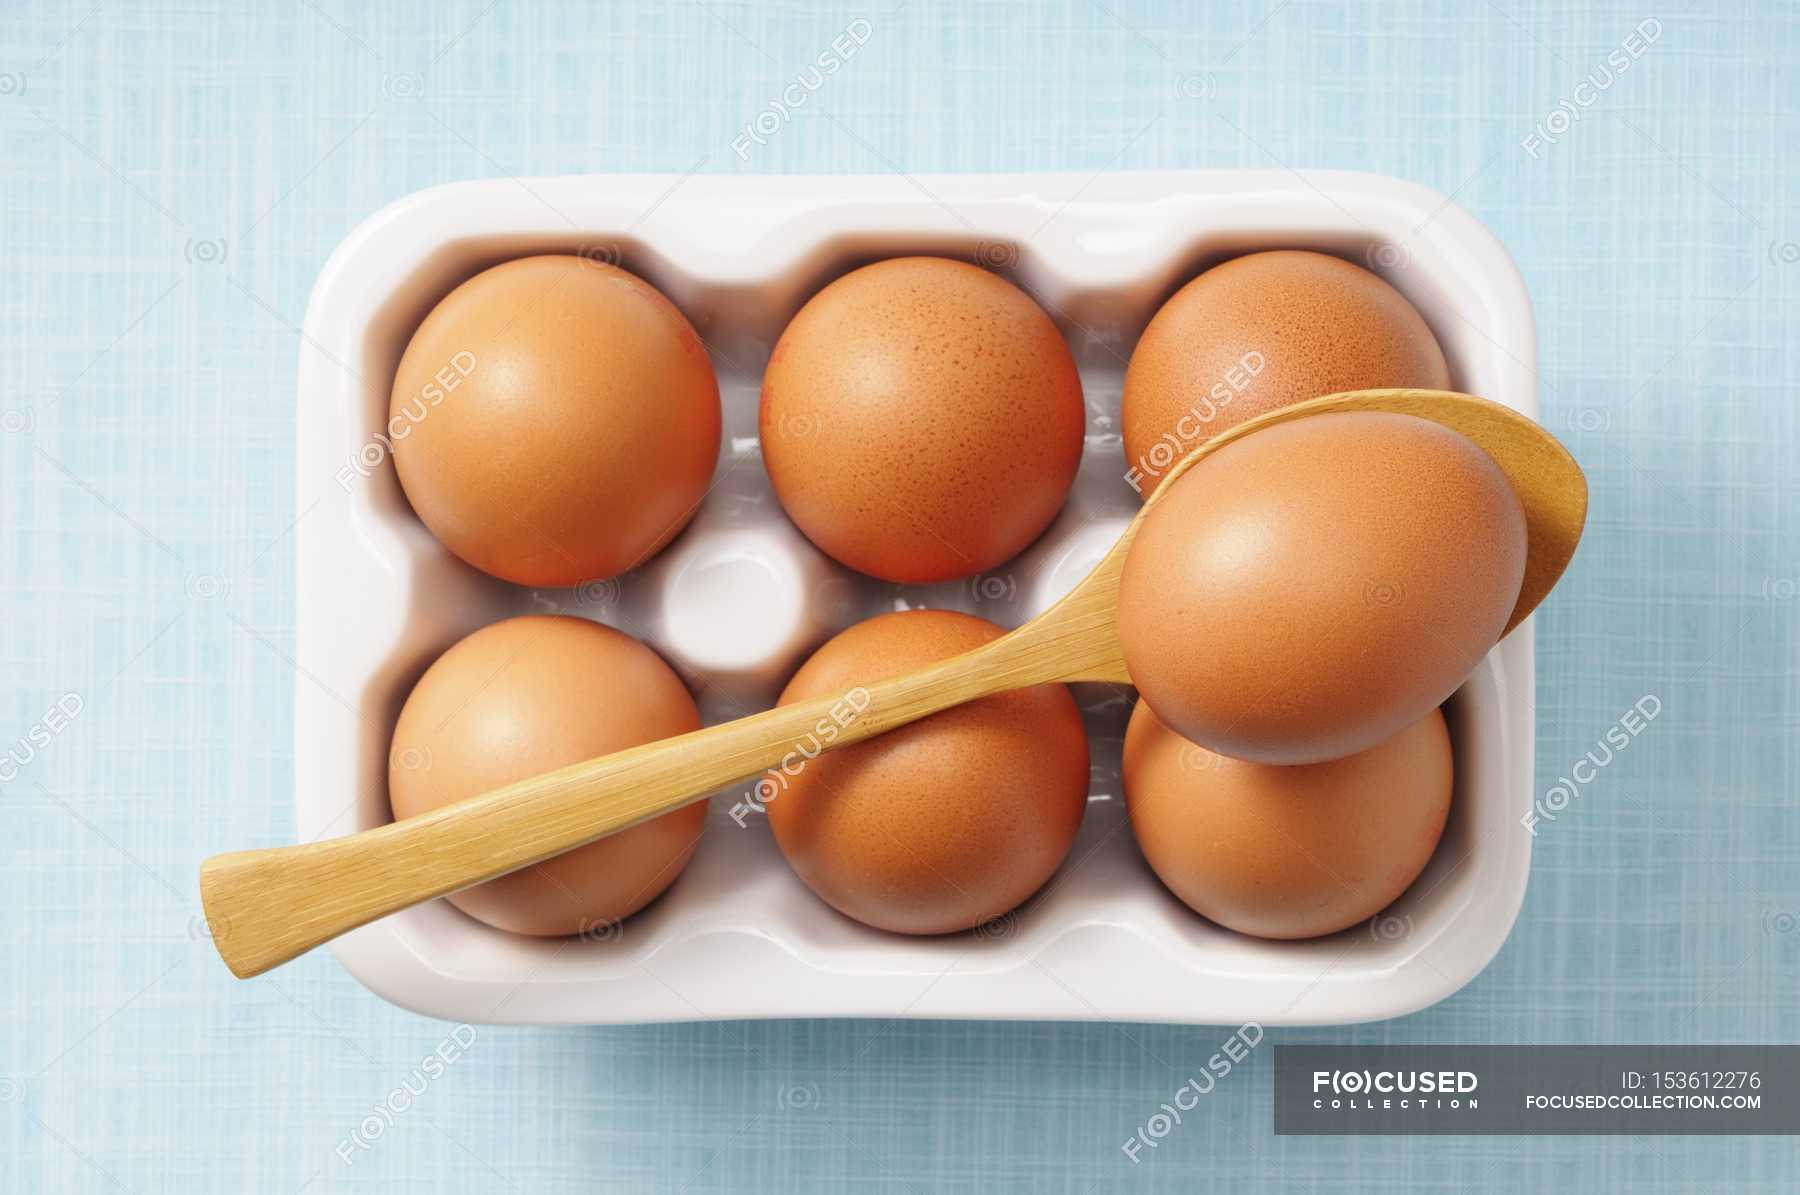 Brown eggs in box with wooden spoon — Stock Photo | #153612276